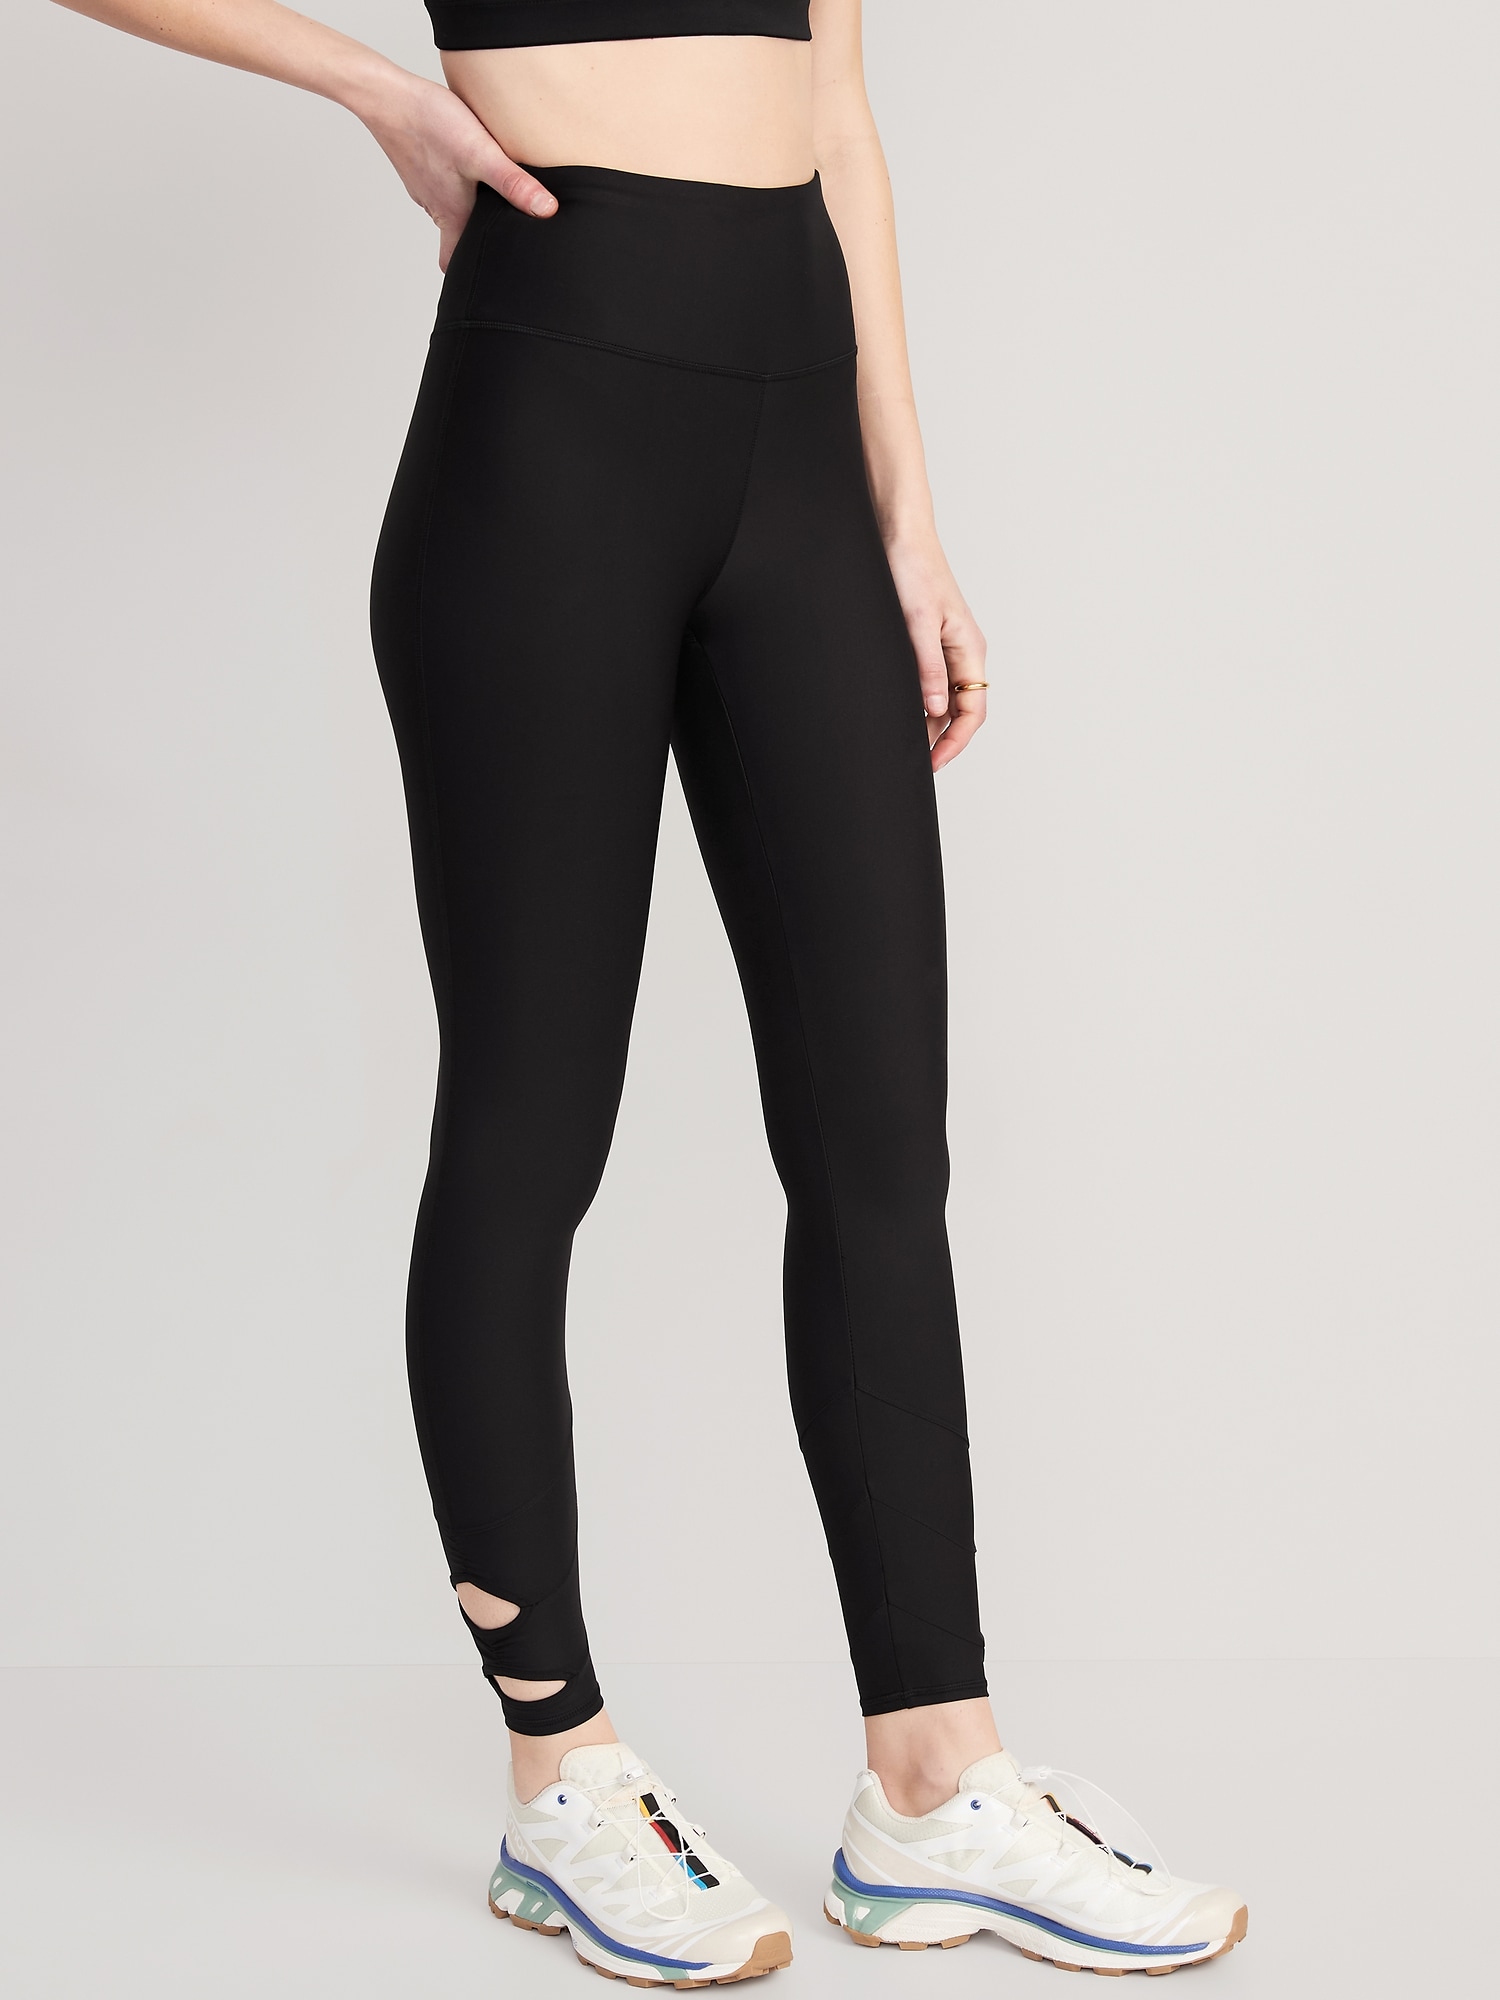 Old Navy High-Waisted PowerSoft 7/8-Length Side-Cutout Leggings for Women black. 1